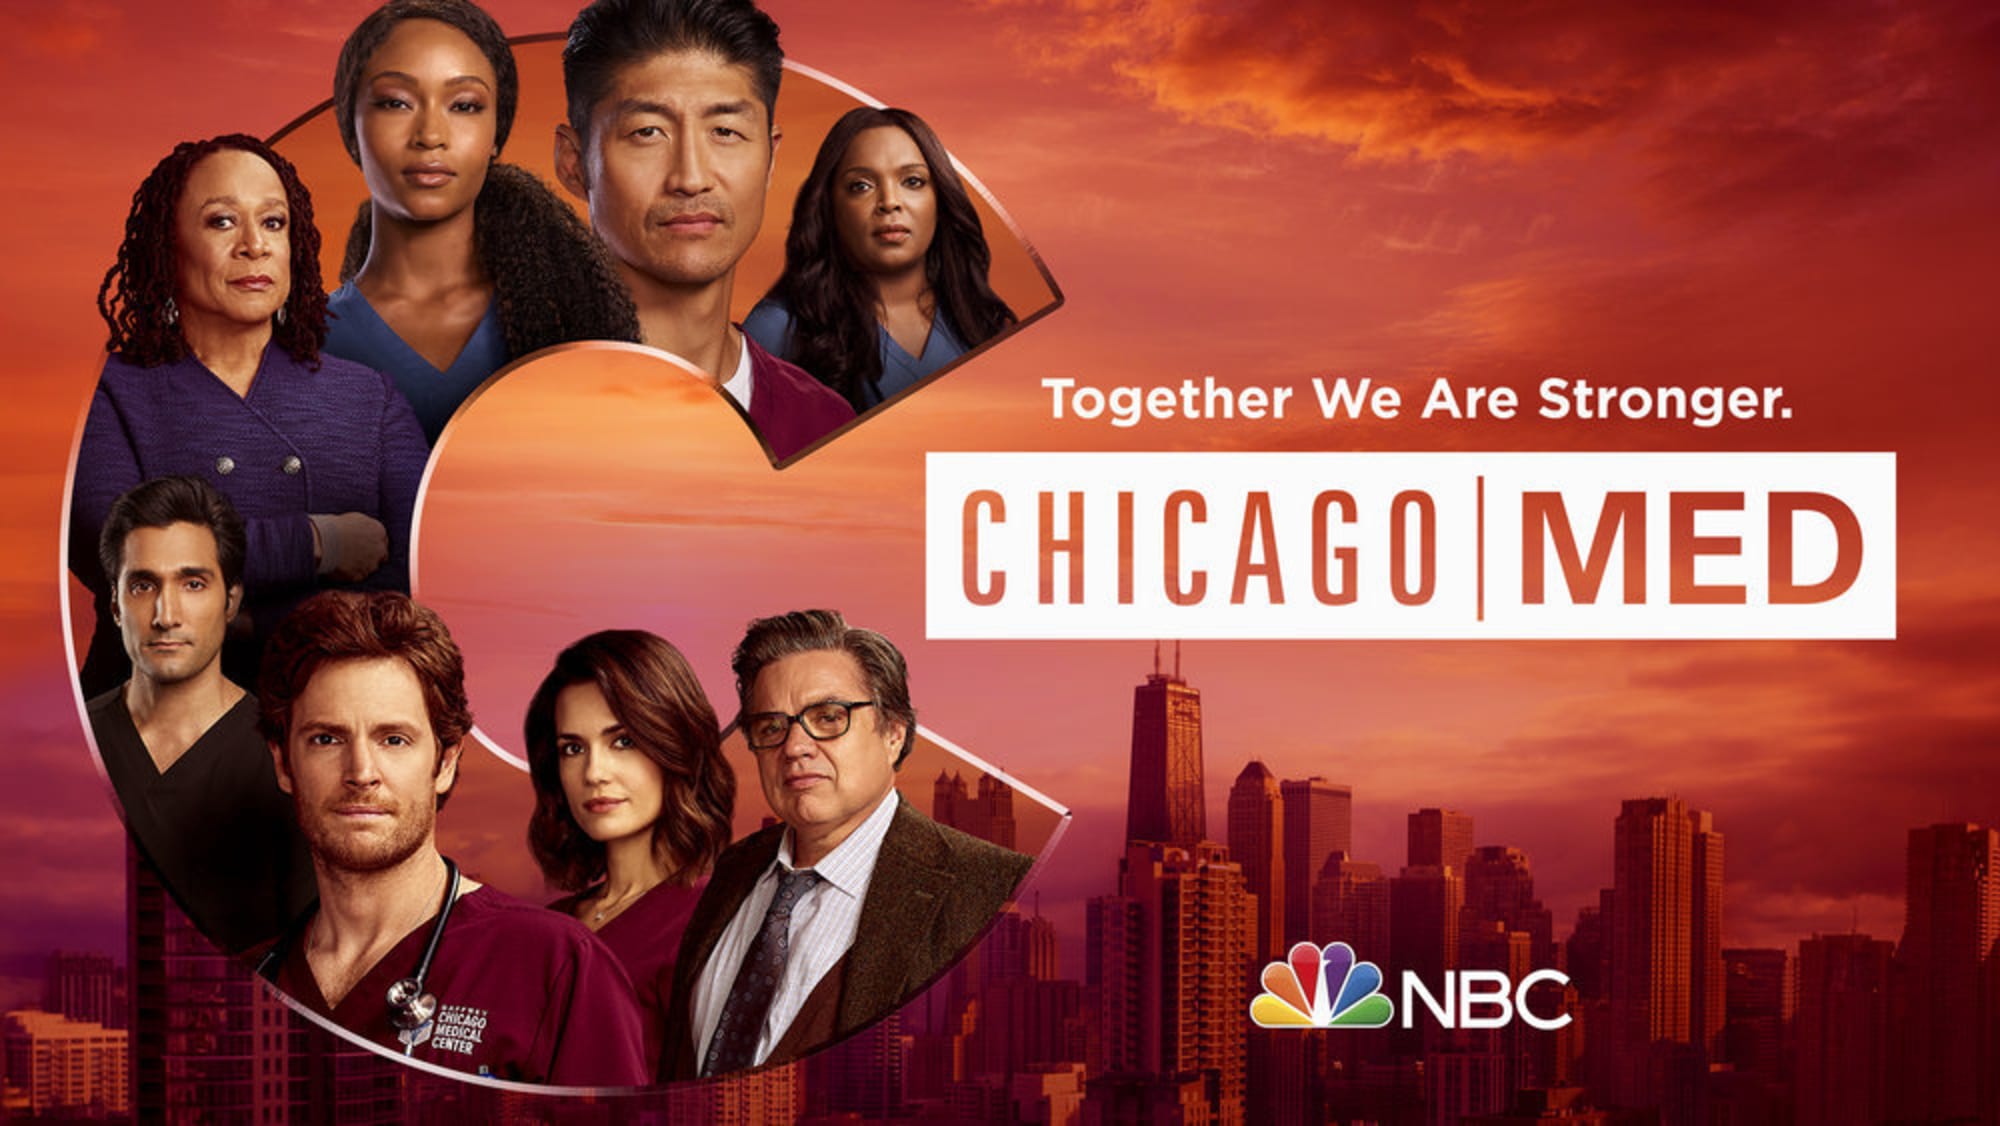 Is Chicago Med season 6 available for streaming on Hulu?